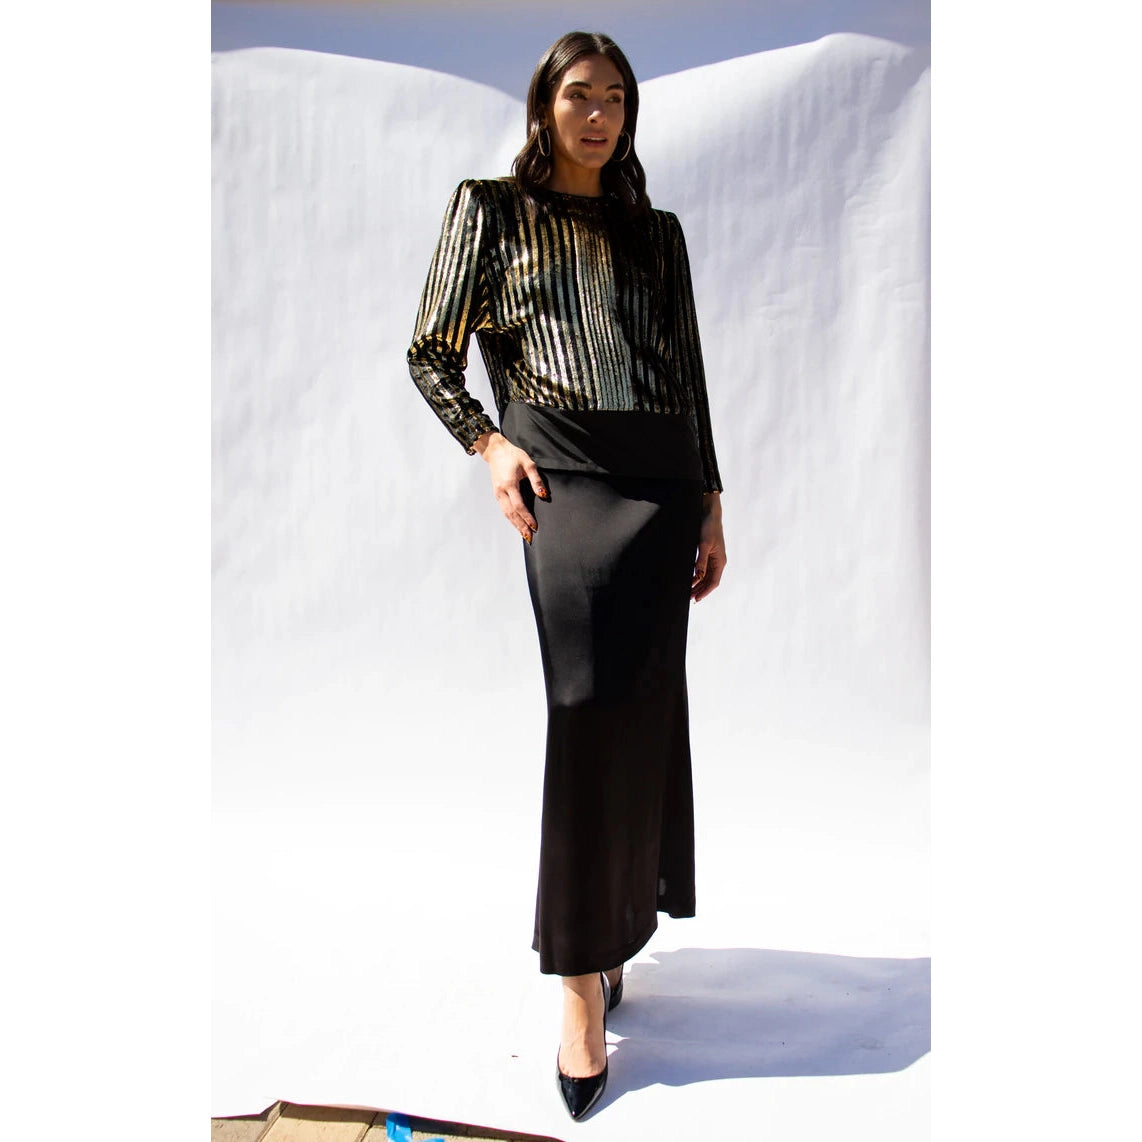 Pre-Owned JEAN PAUL GAULTIER 1990's Long Black Skirt |  Extra Small - theREMODA